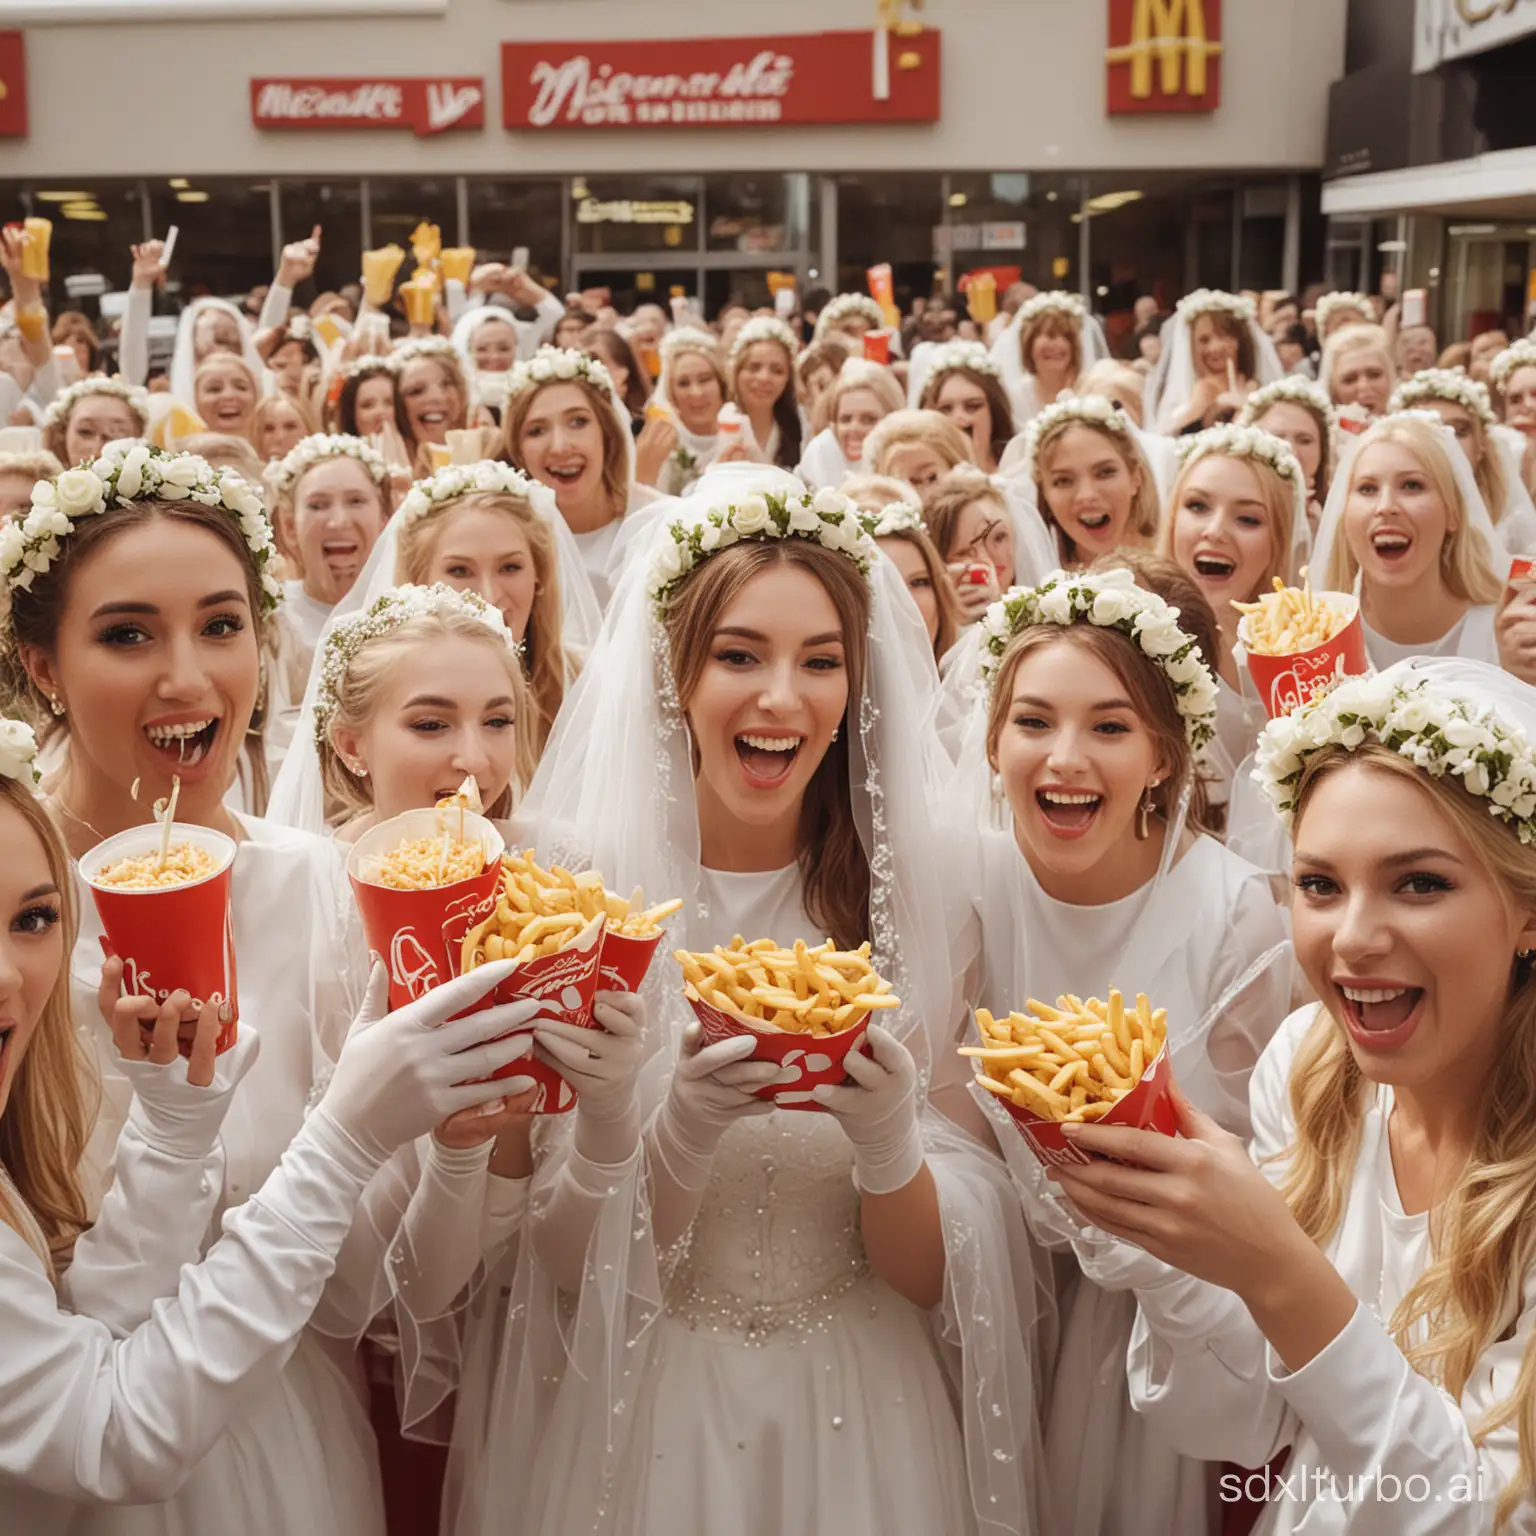 Crowd of brides in veil and wreath and white glove eating Big Mac french fries coke together at McDonald's